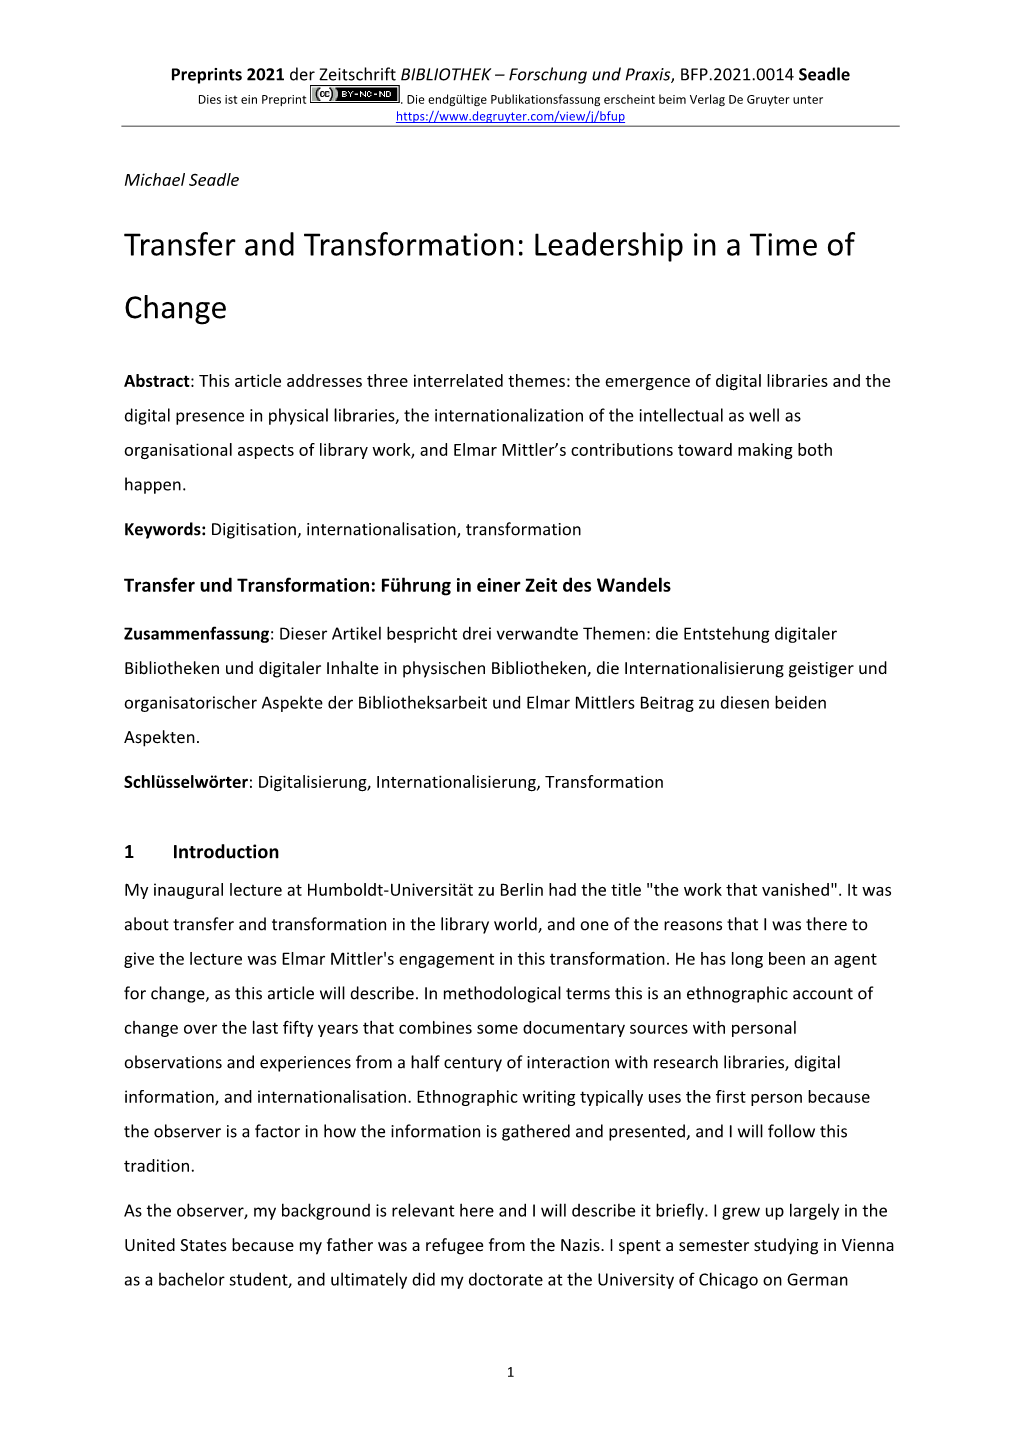 Transfer and Transformation: Leadership in a Time of Change